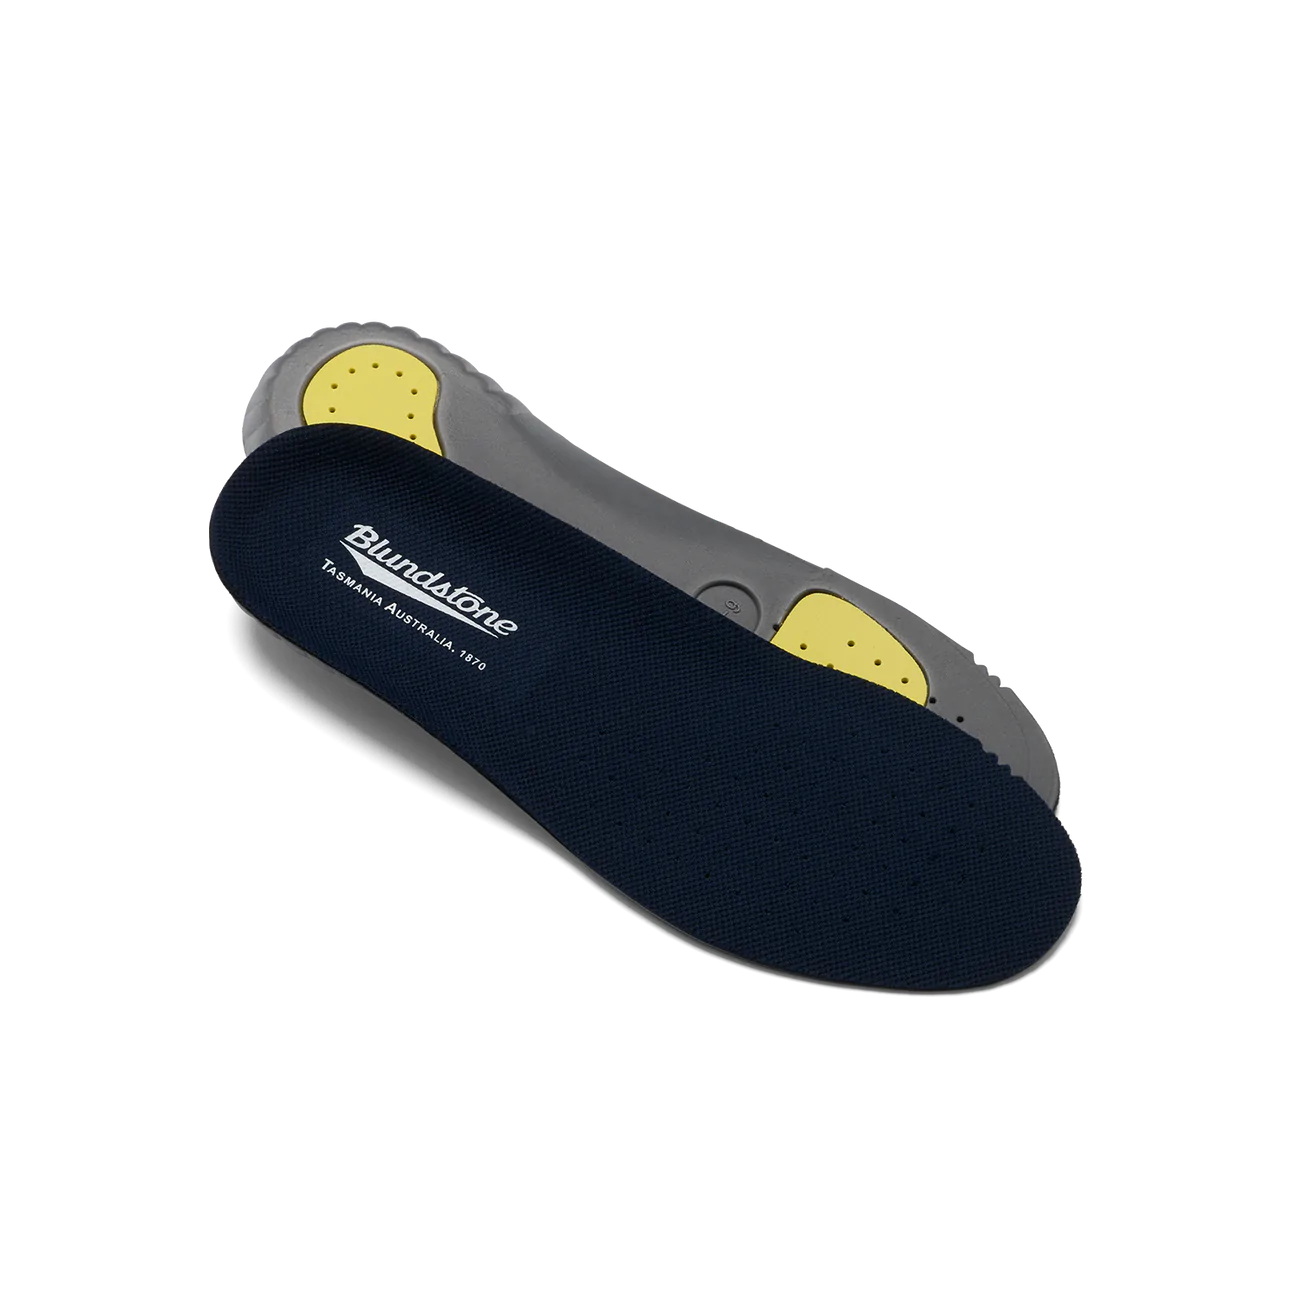 Blundstone Comfort Classic Footbed